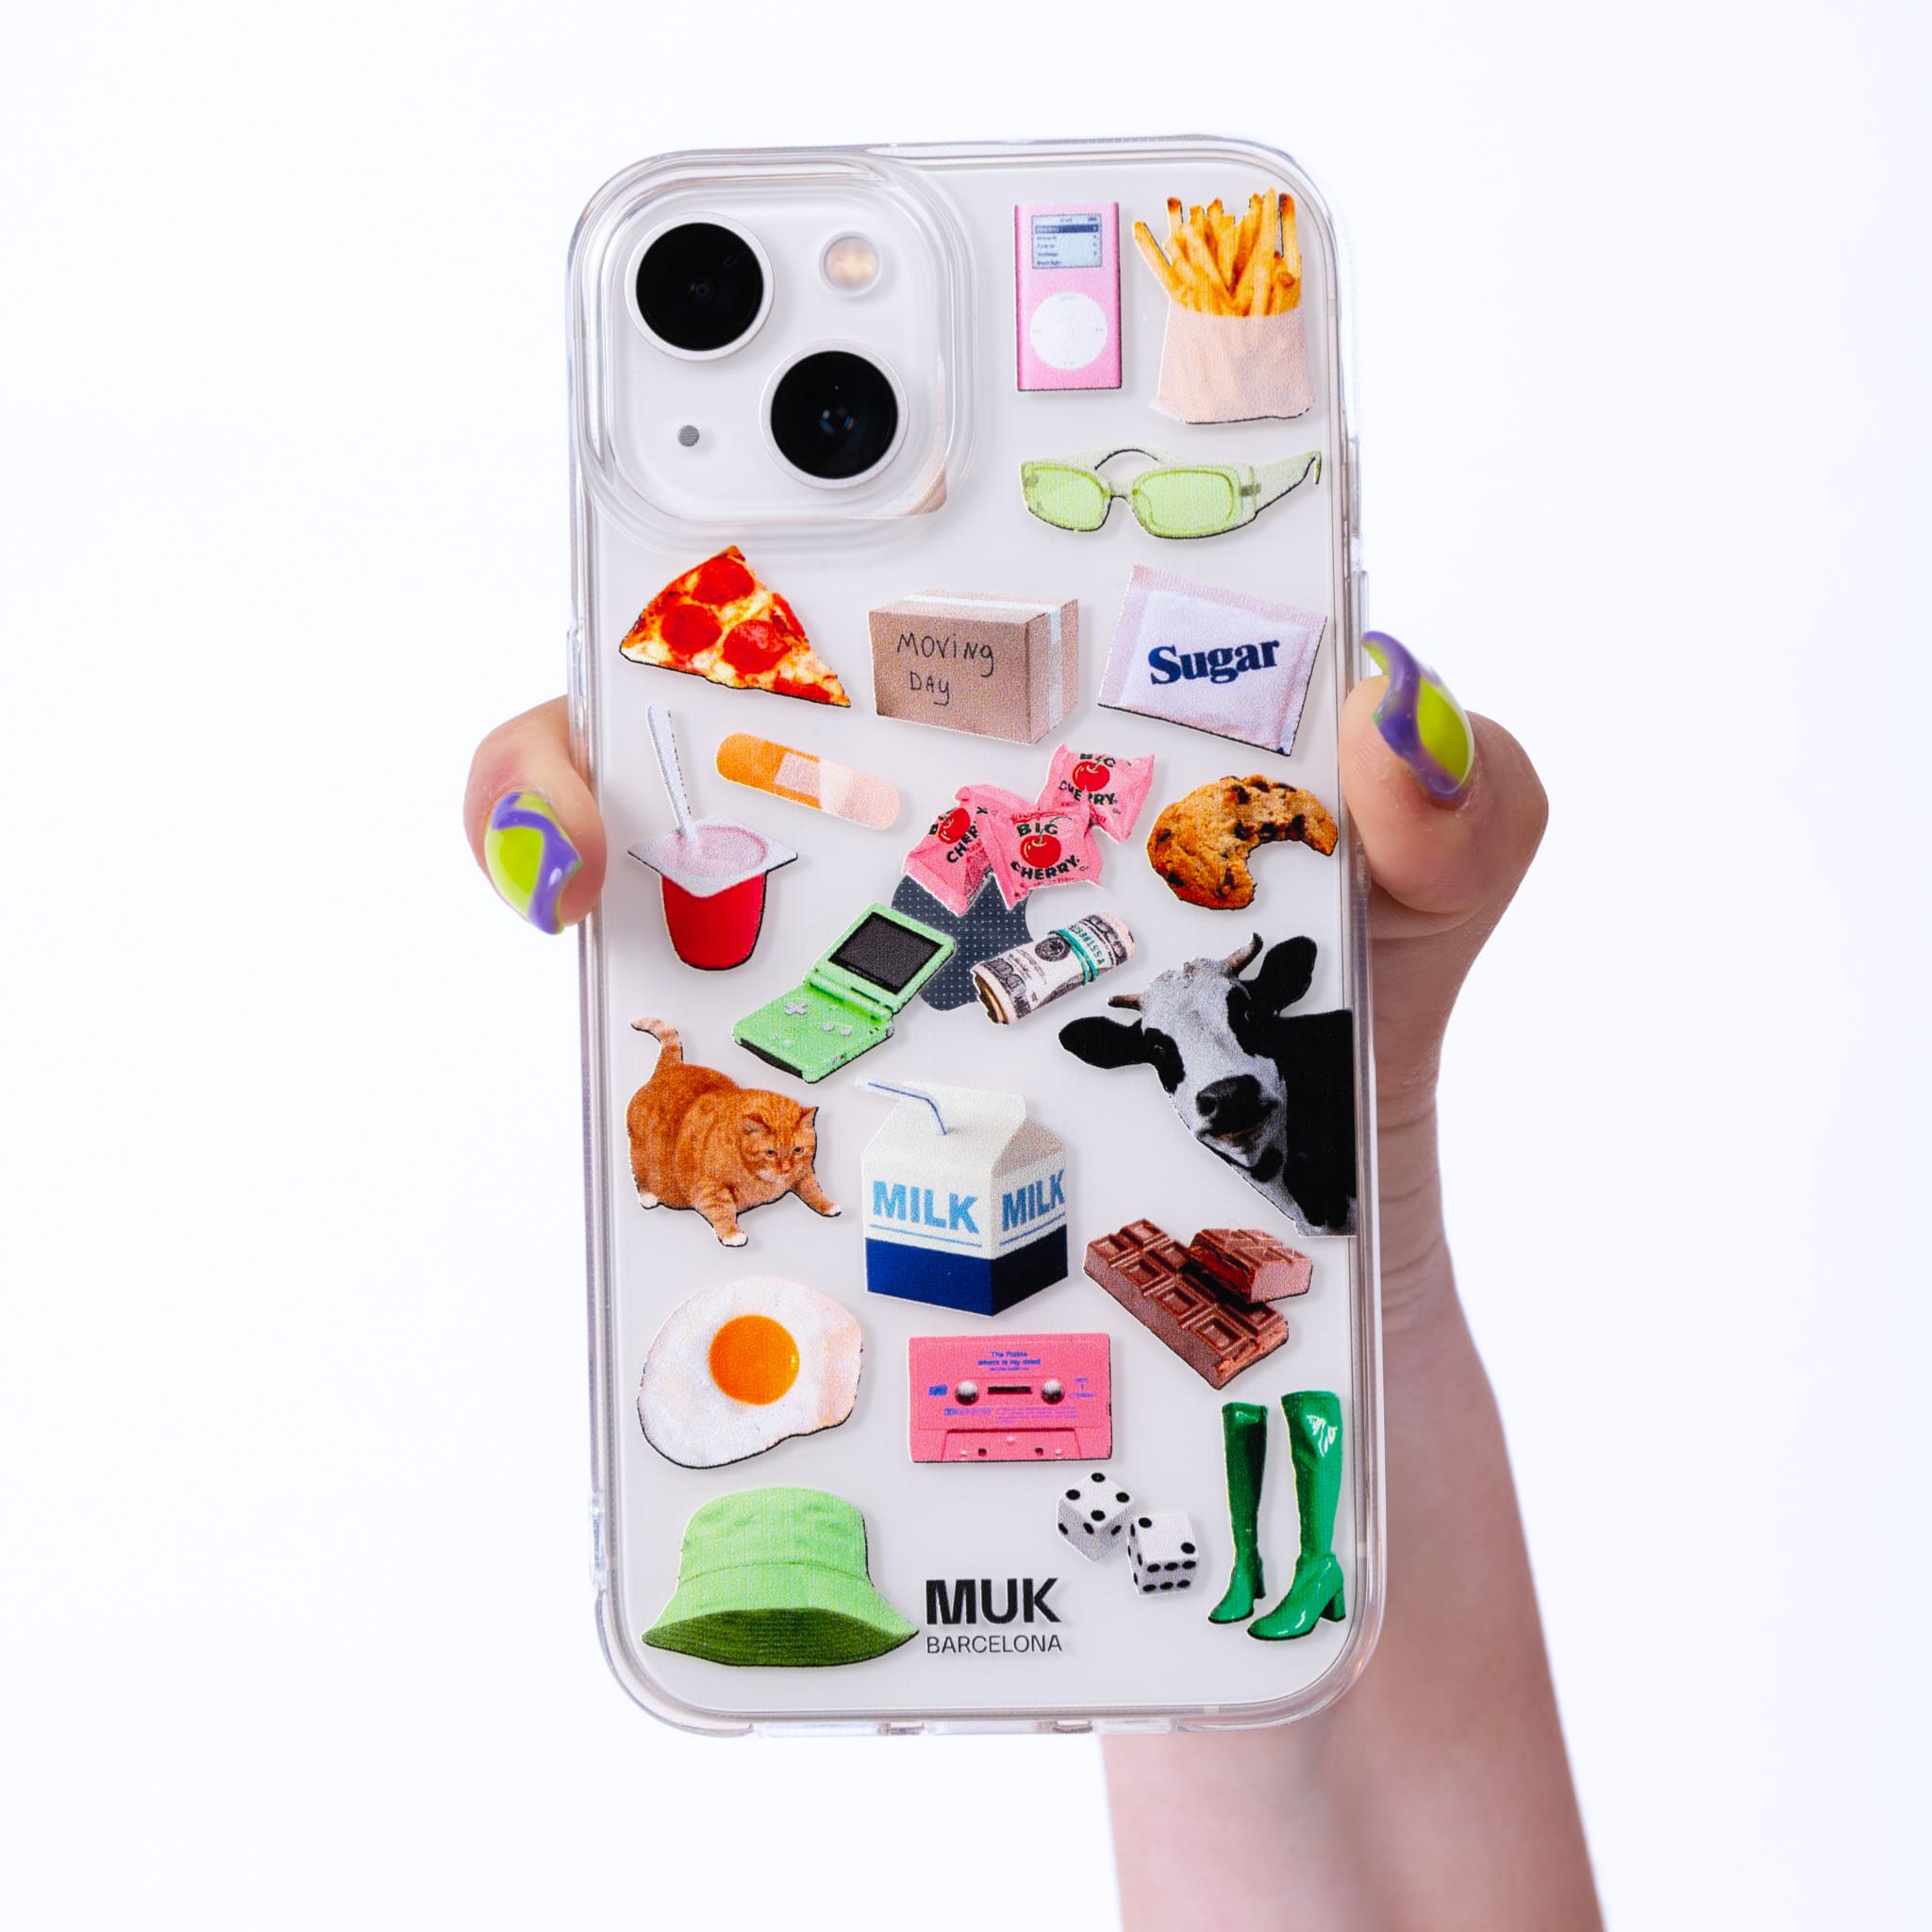 Why Not mobile phone case